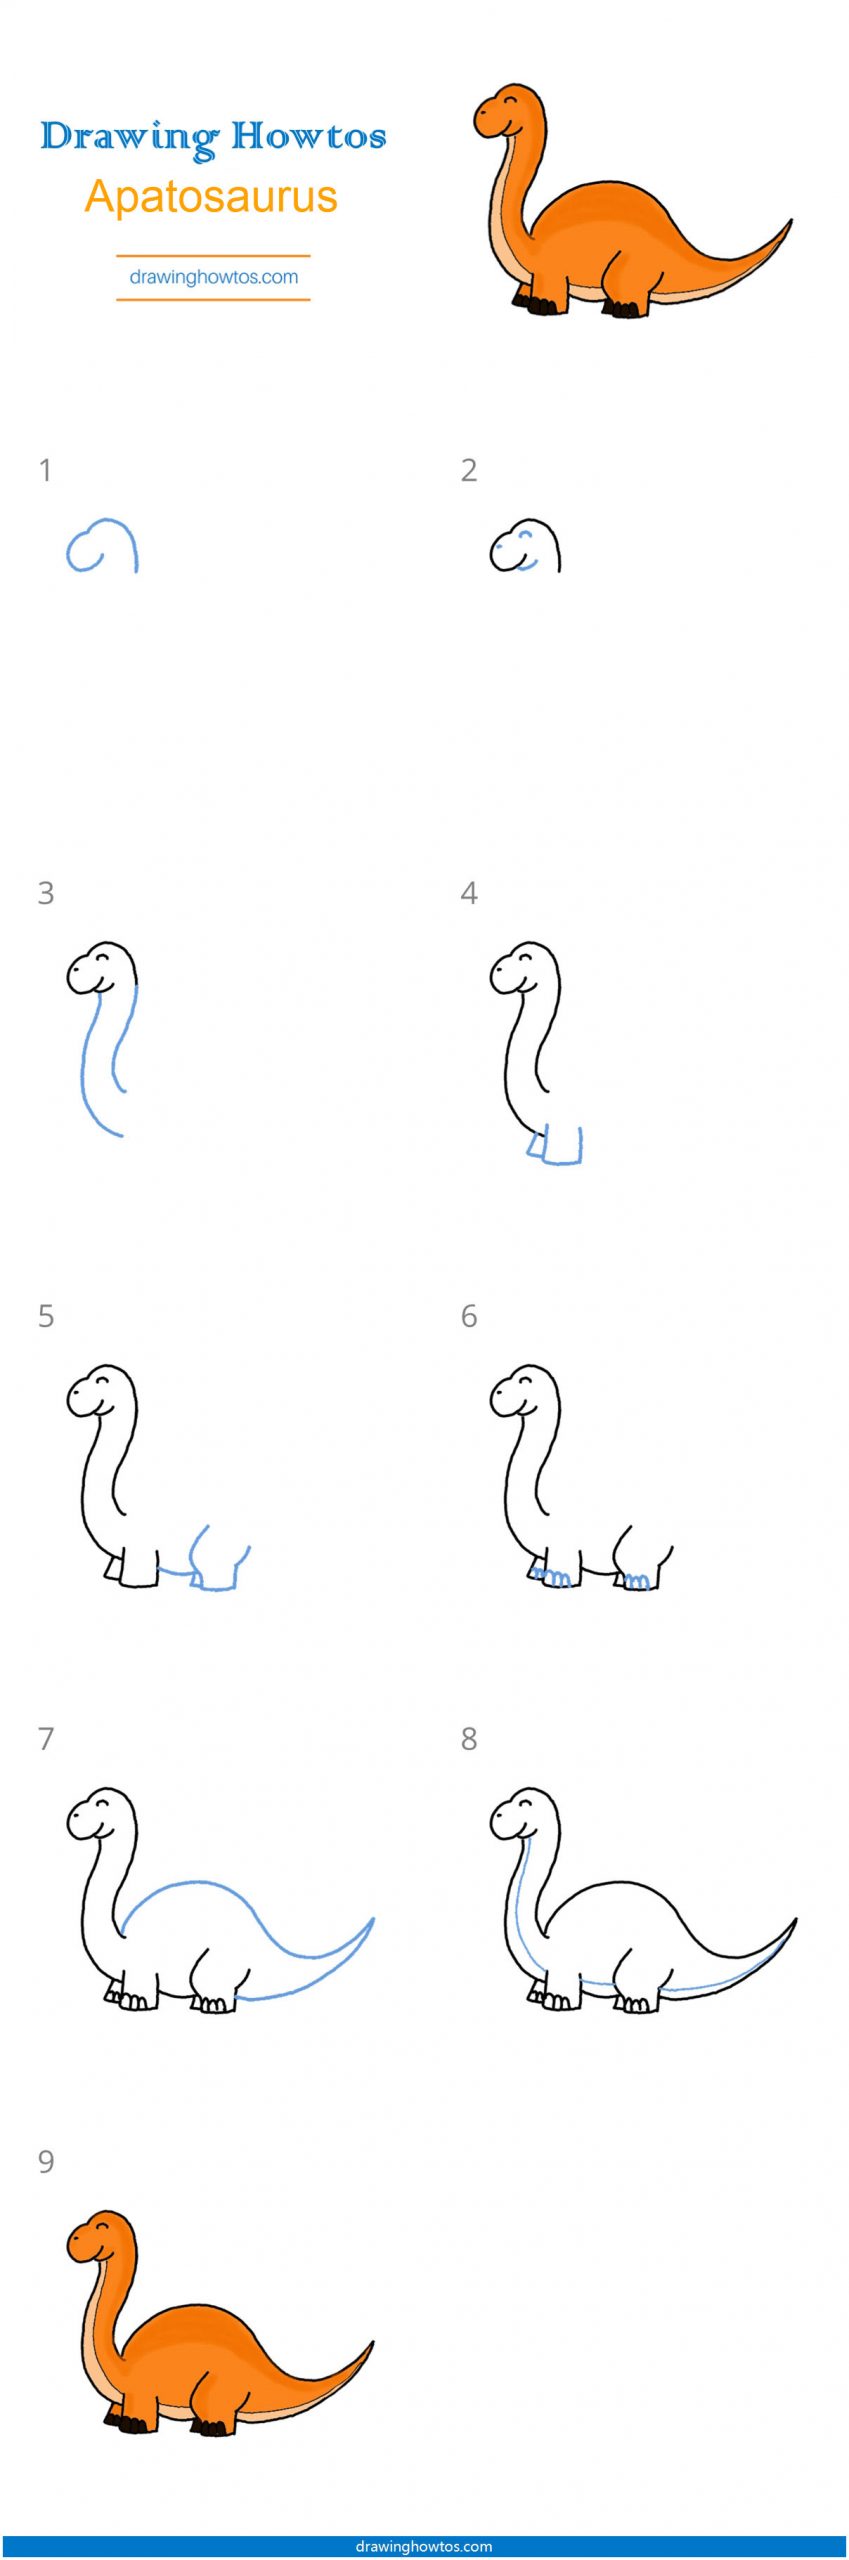 How to Draw an Apatosaurus Step by Step